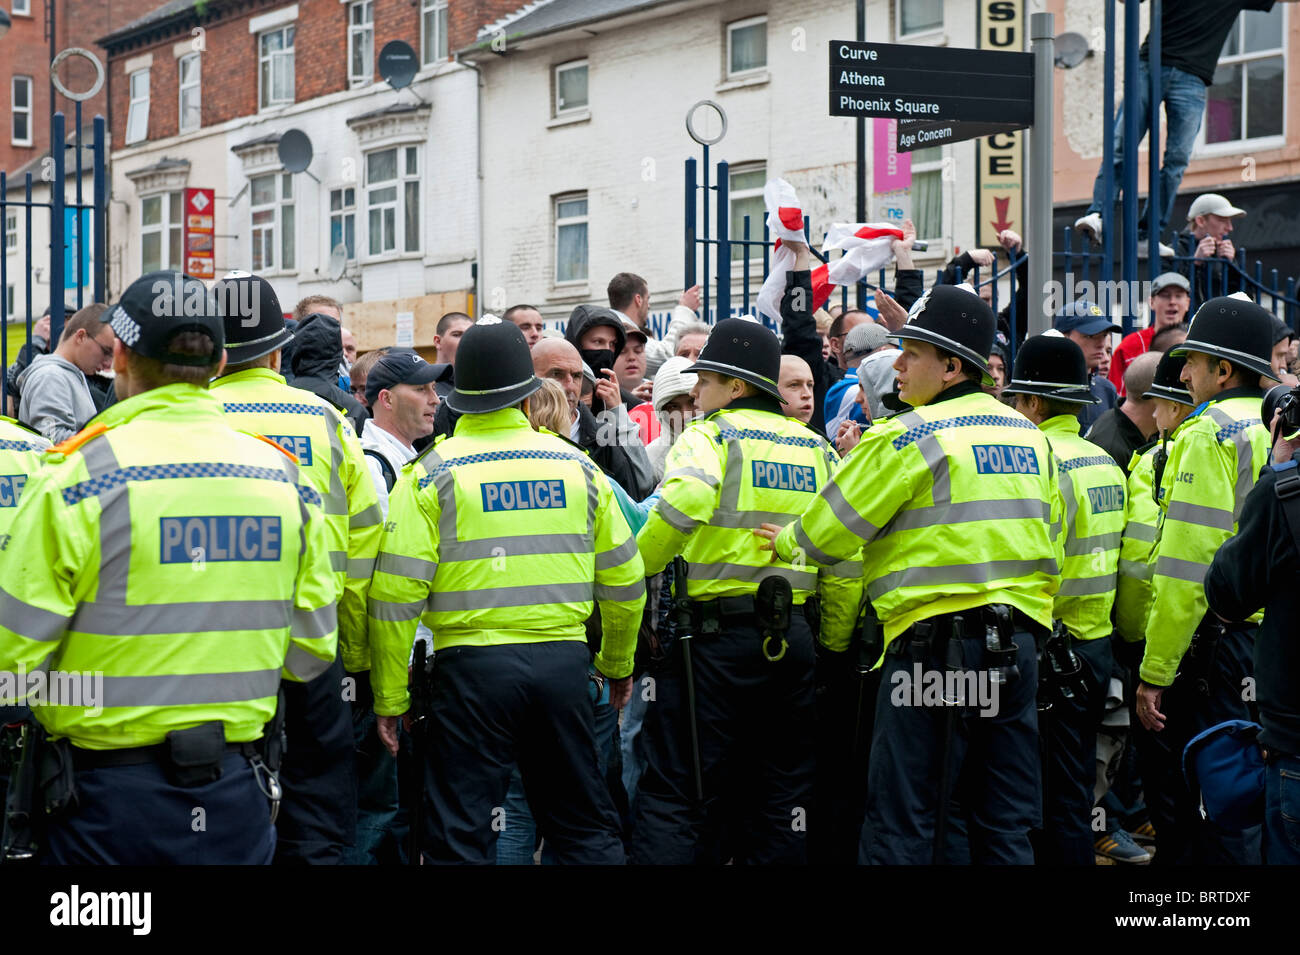 Policing The English Defence League-Demonstration in Leicester. 9. Oktober 2010. Stockfoto